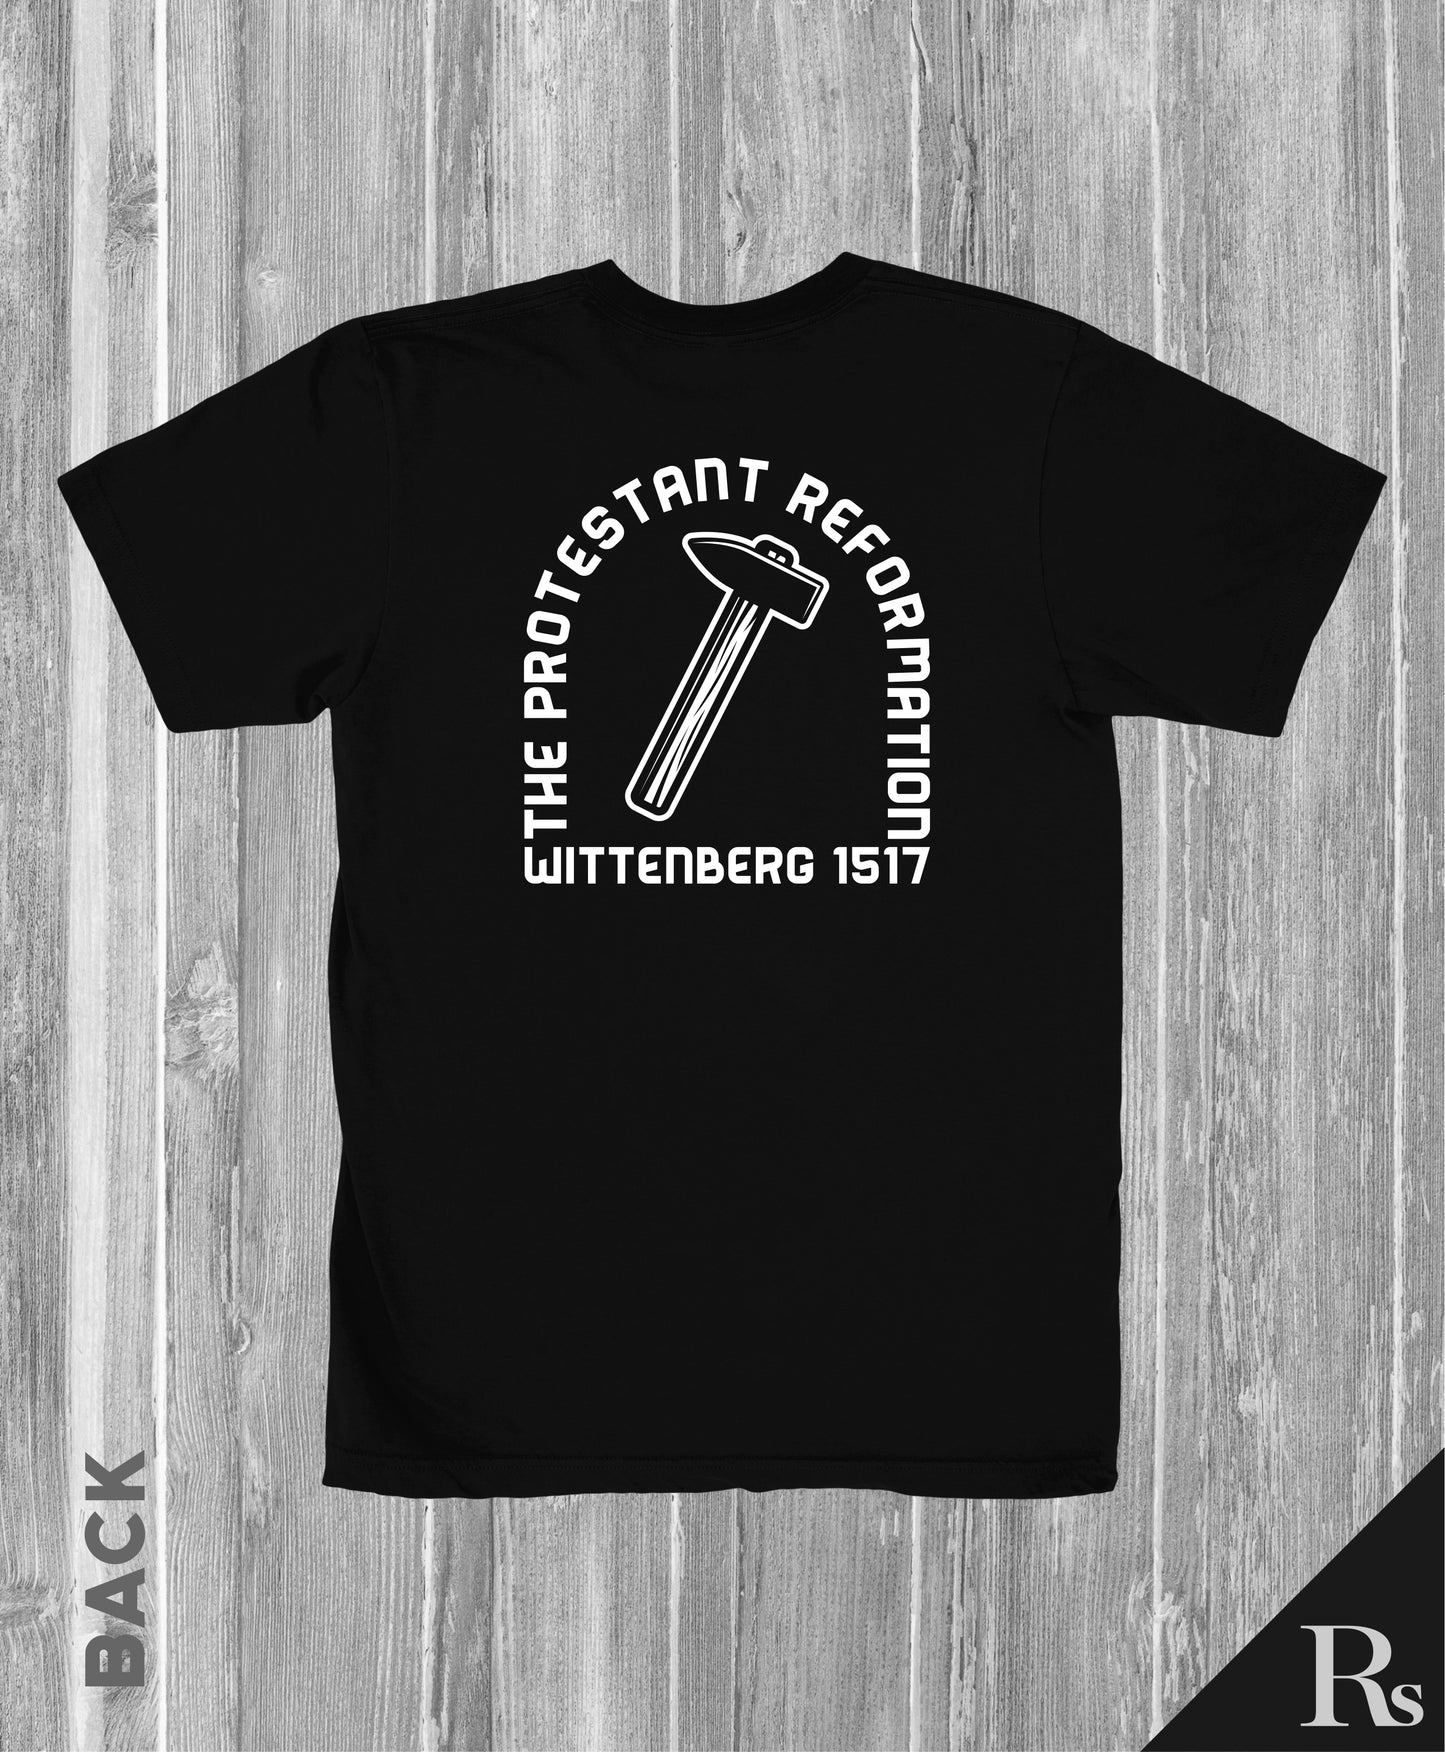 NEW 1517 PROTESTANT REFORMATION | Rs T-shirts